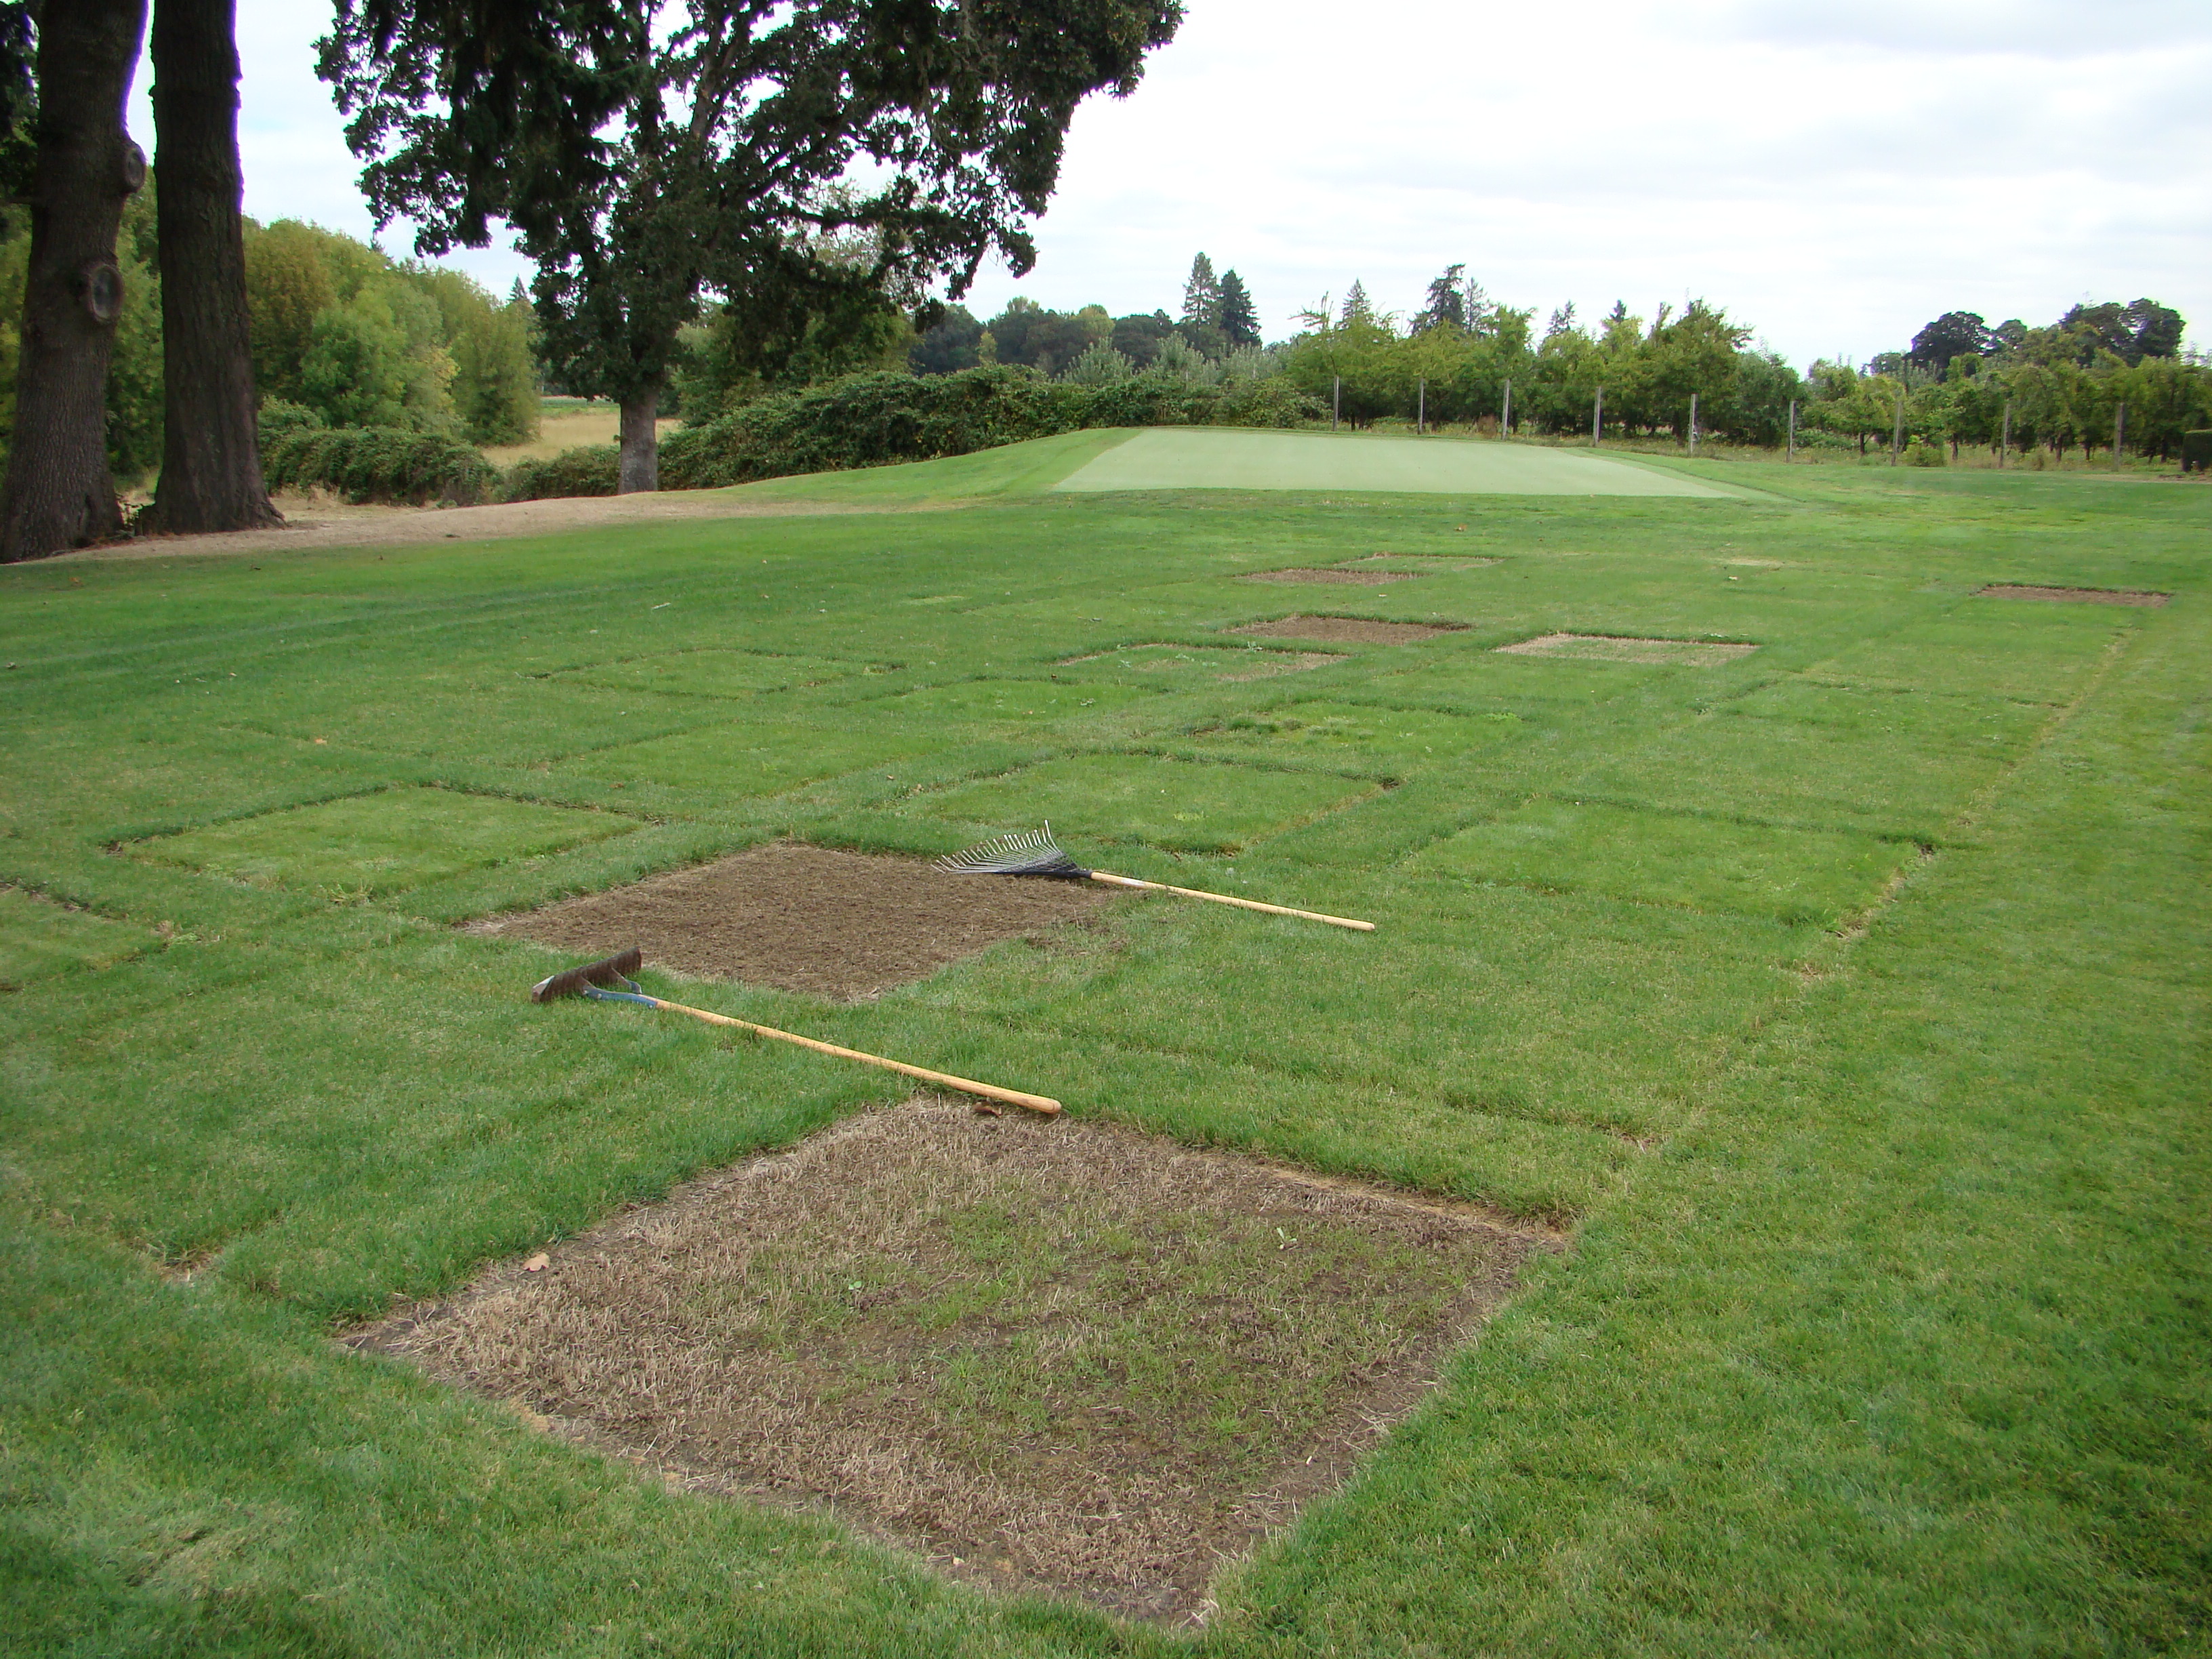 Turfgrass research plots with a few of the plots having sparse growth